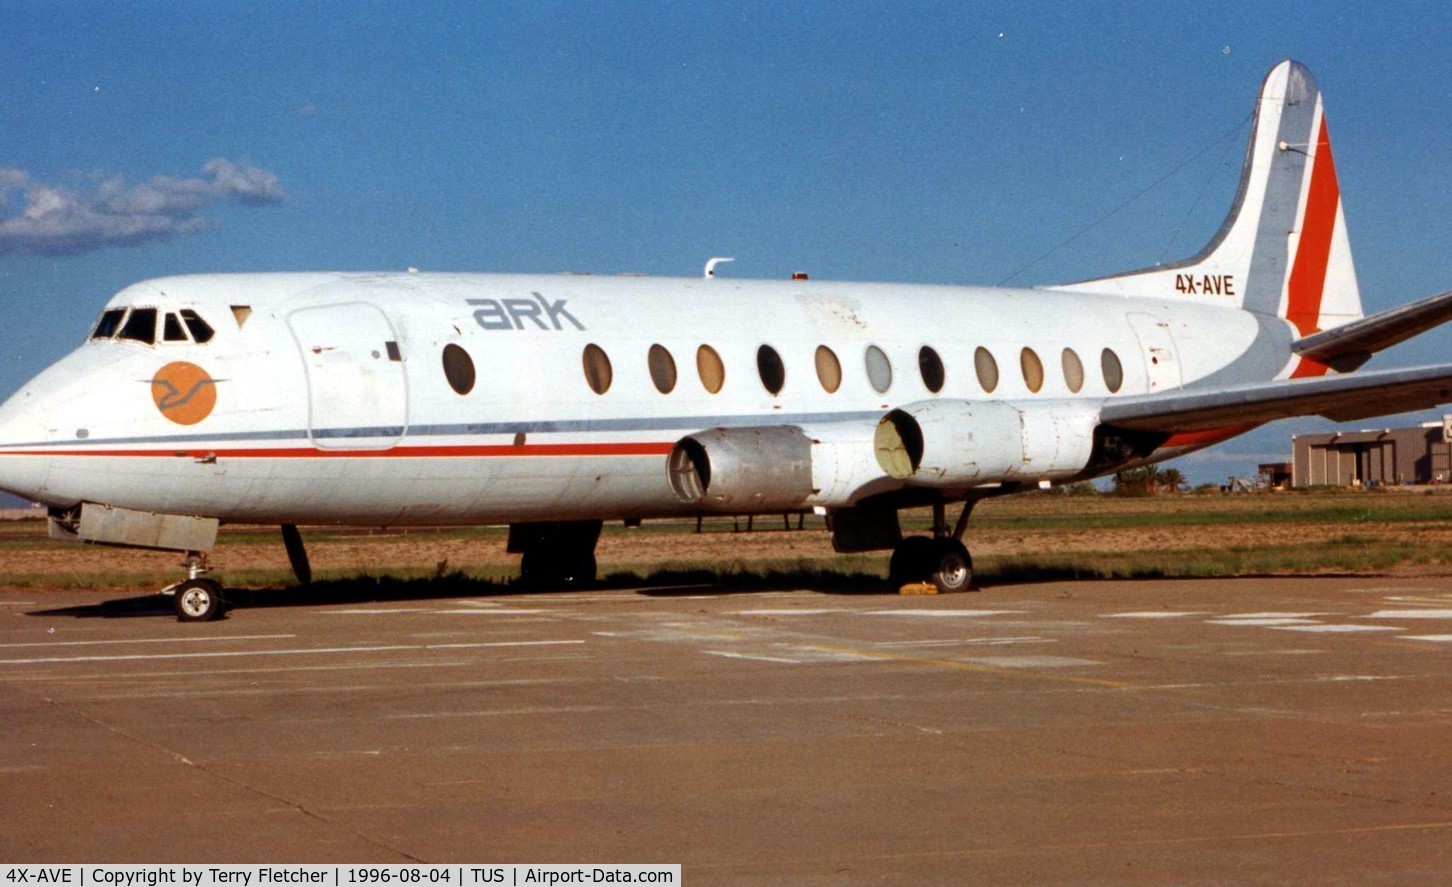 4X-AVE, 1959 Vickers Viscount 831 C/N 403, Viscount was stored for many years at Tuscon